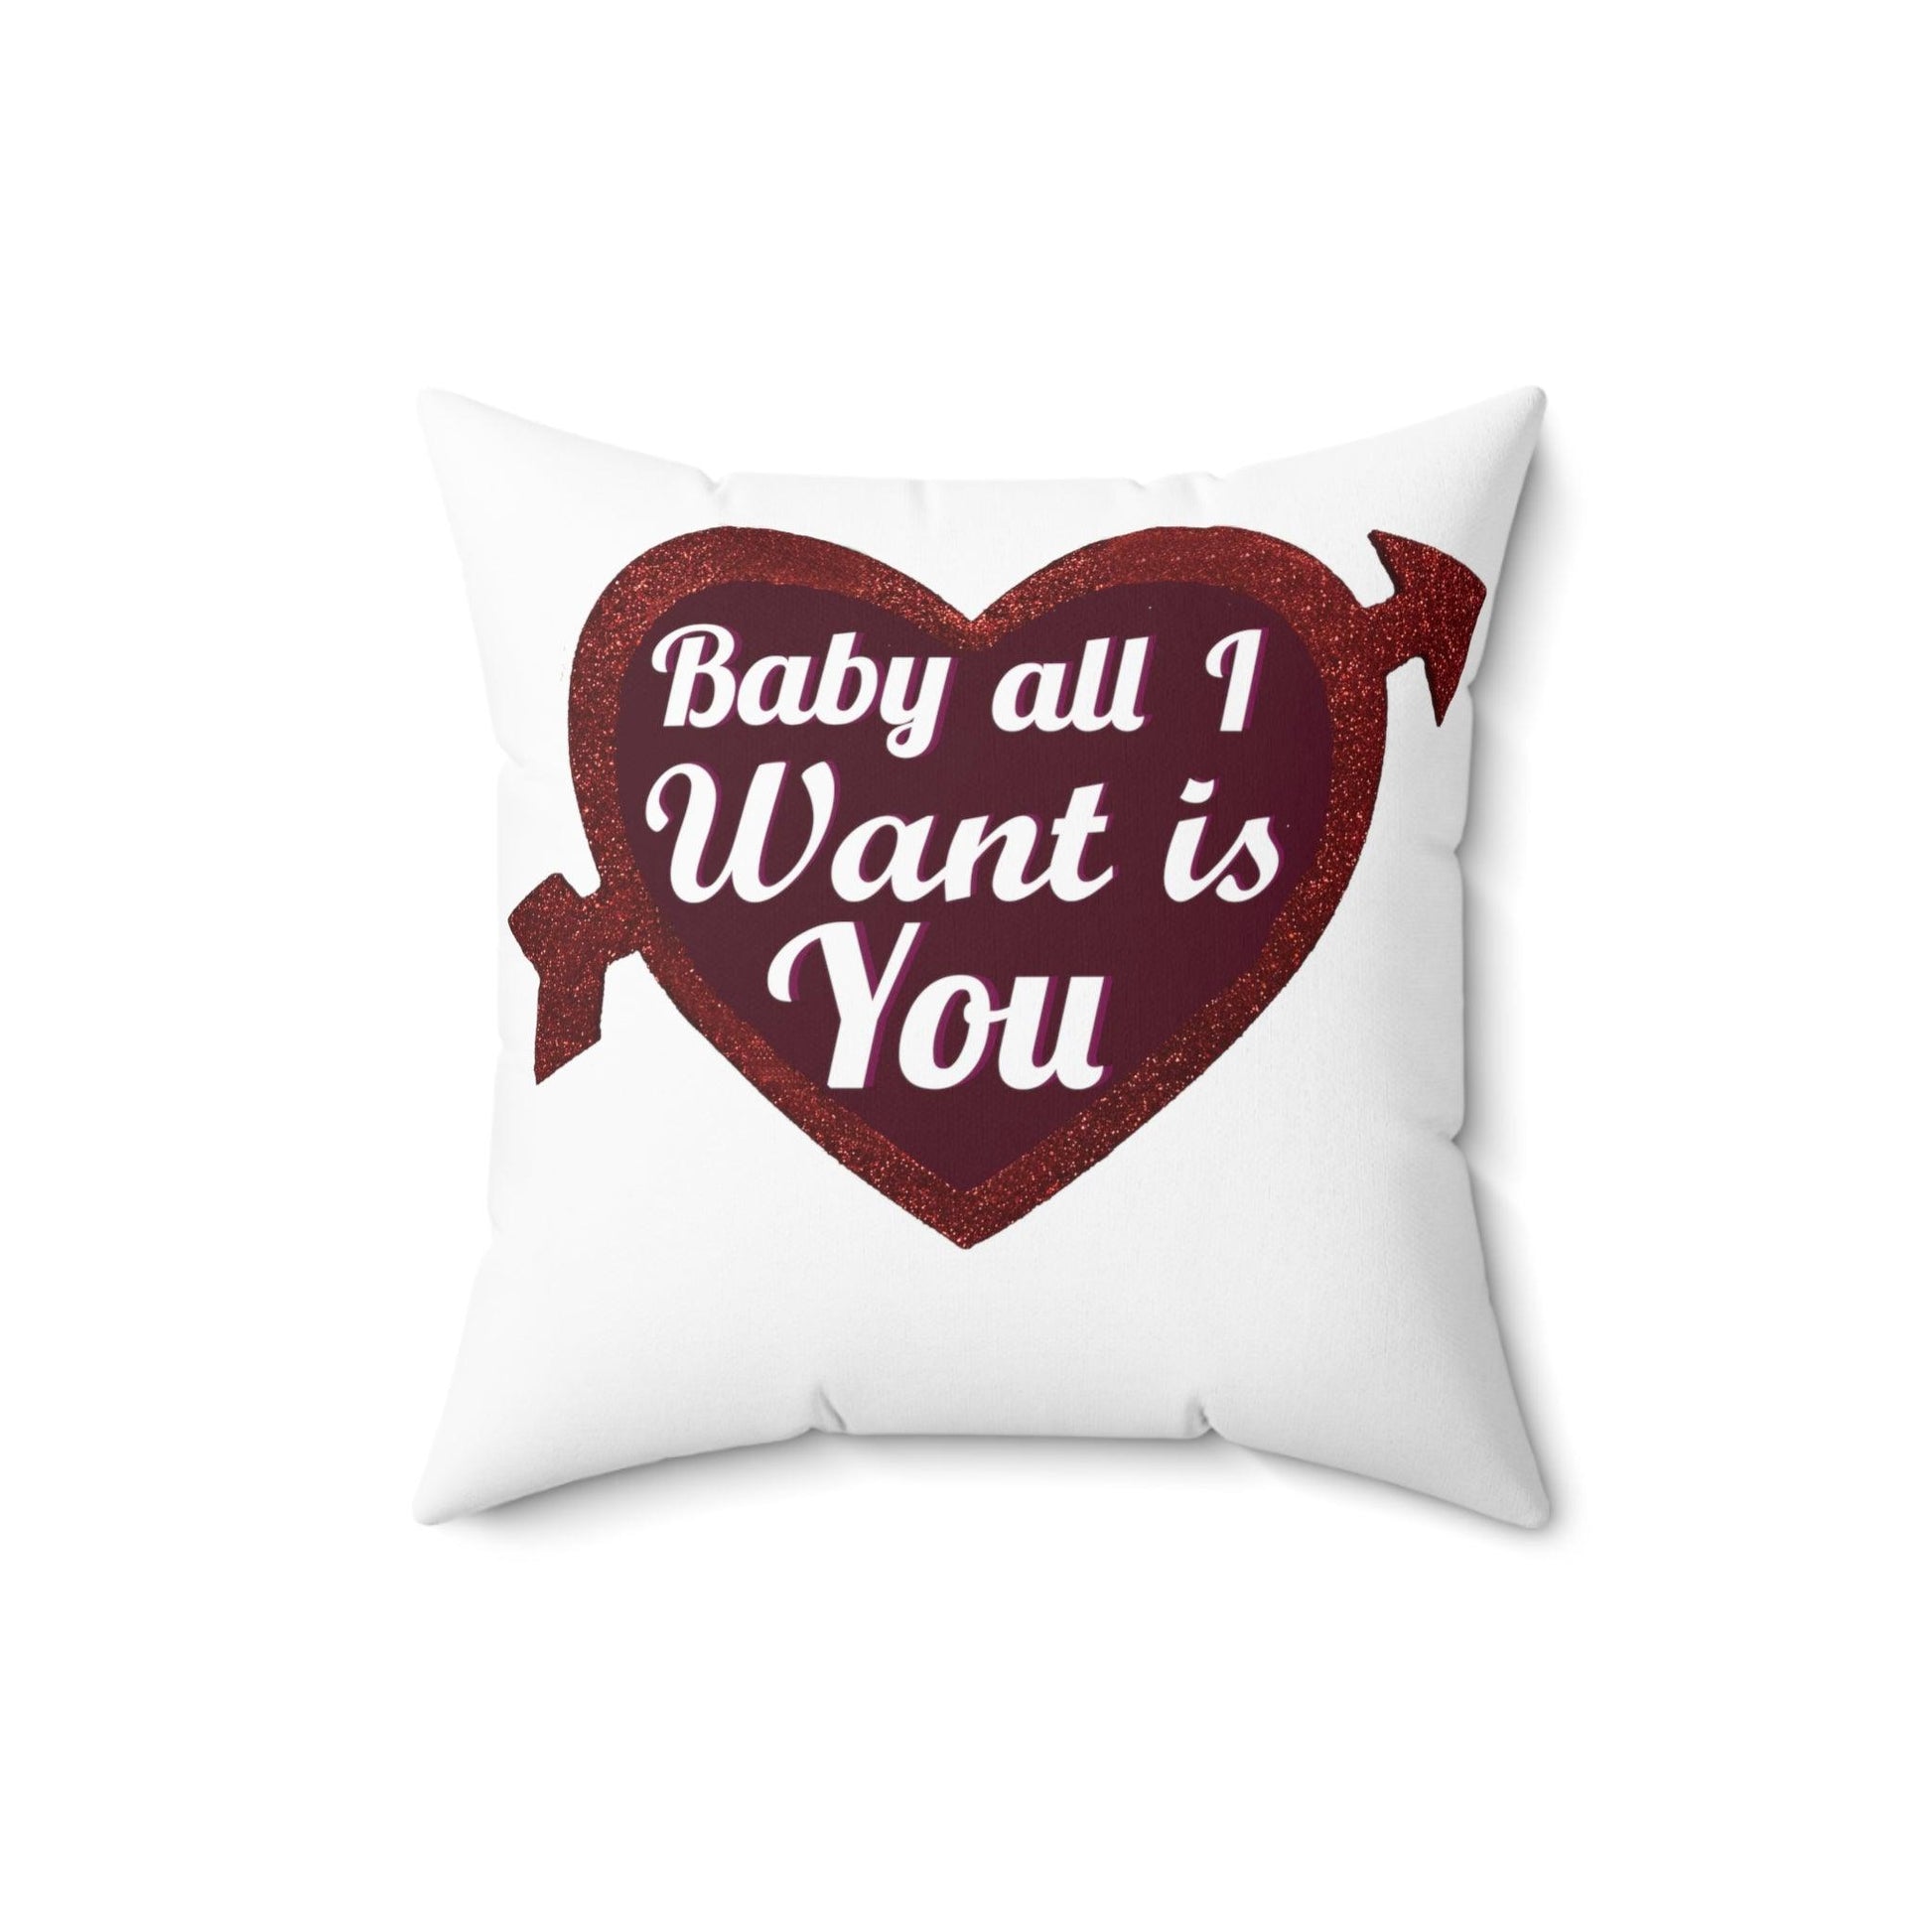 Baby all I want is You Square Pillow - Giftsmojo